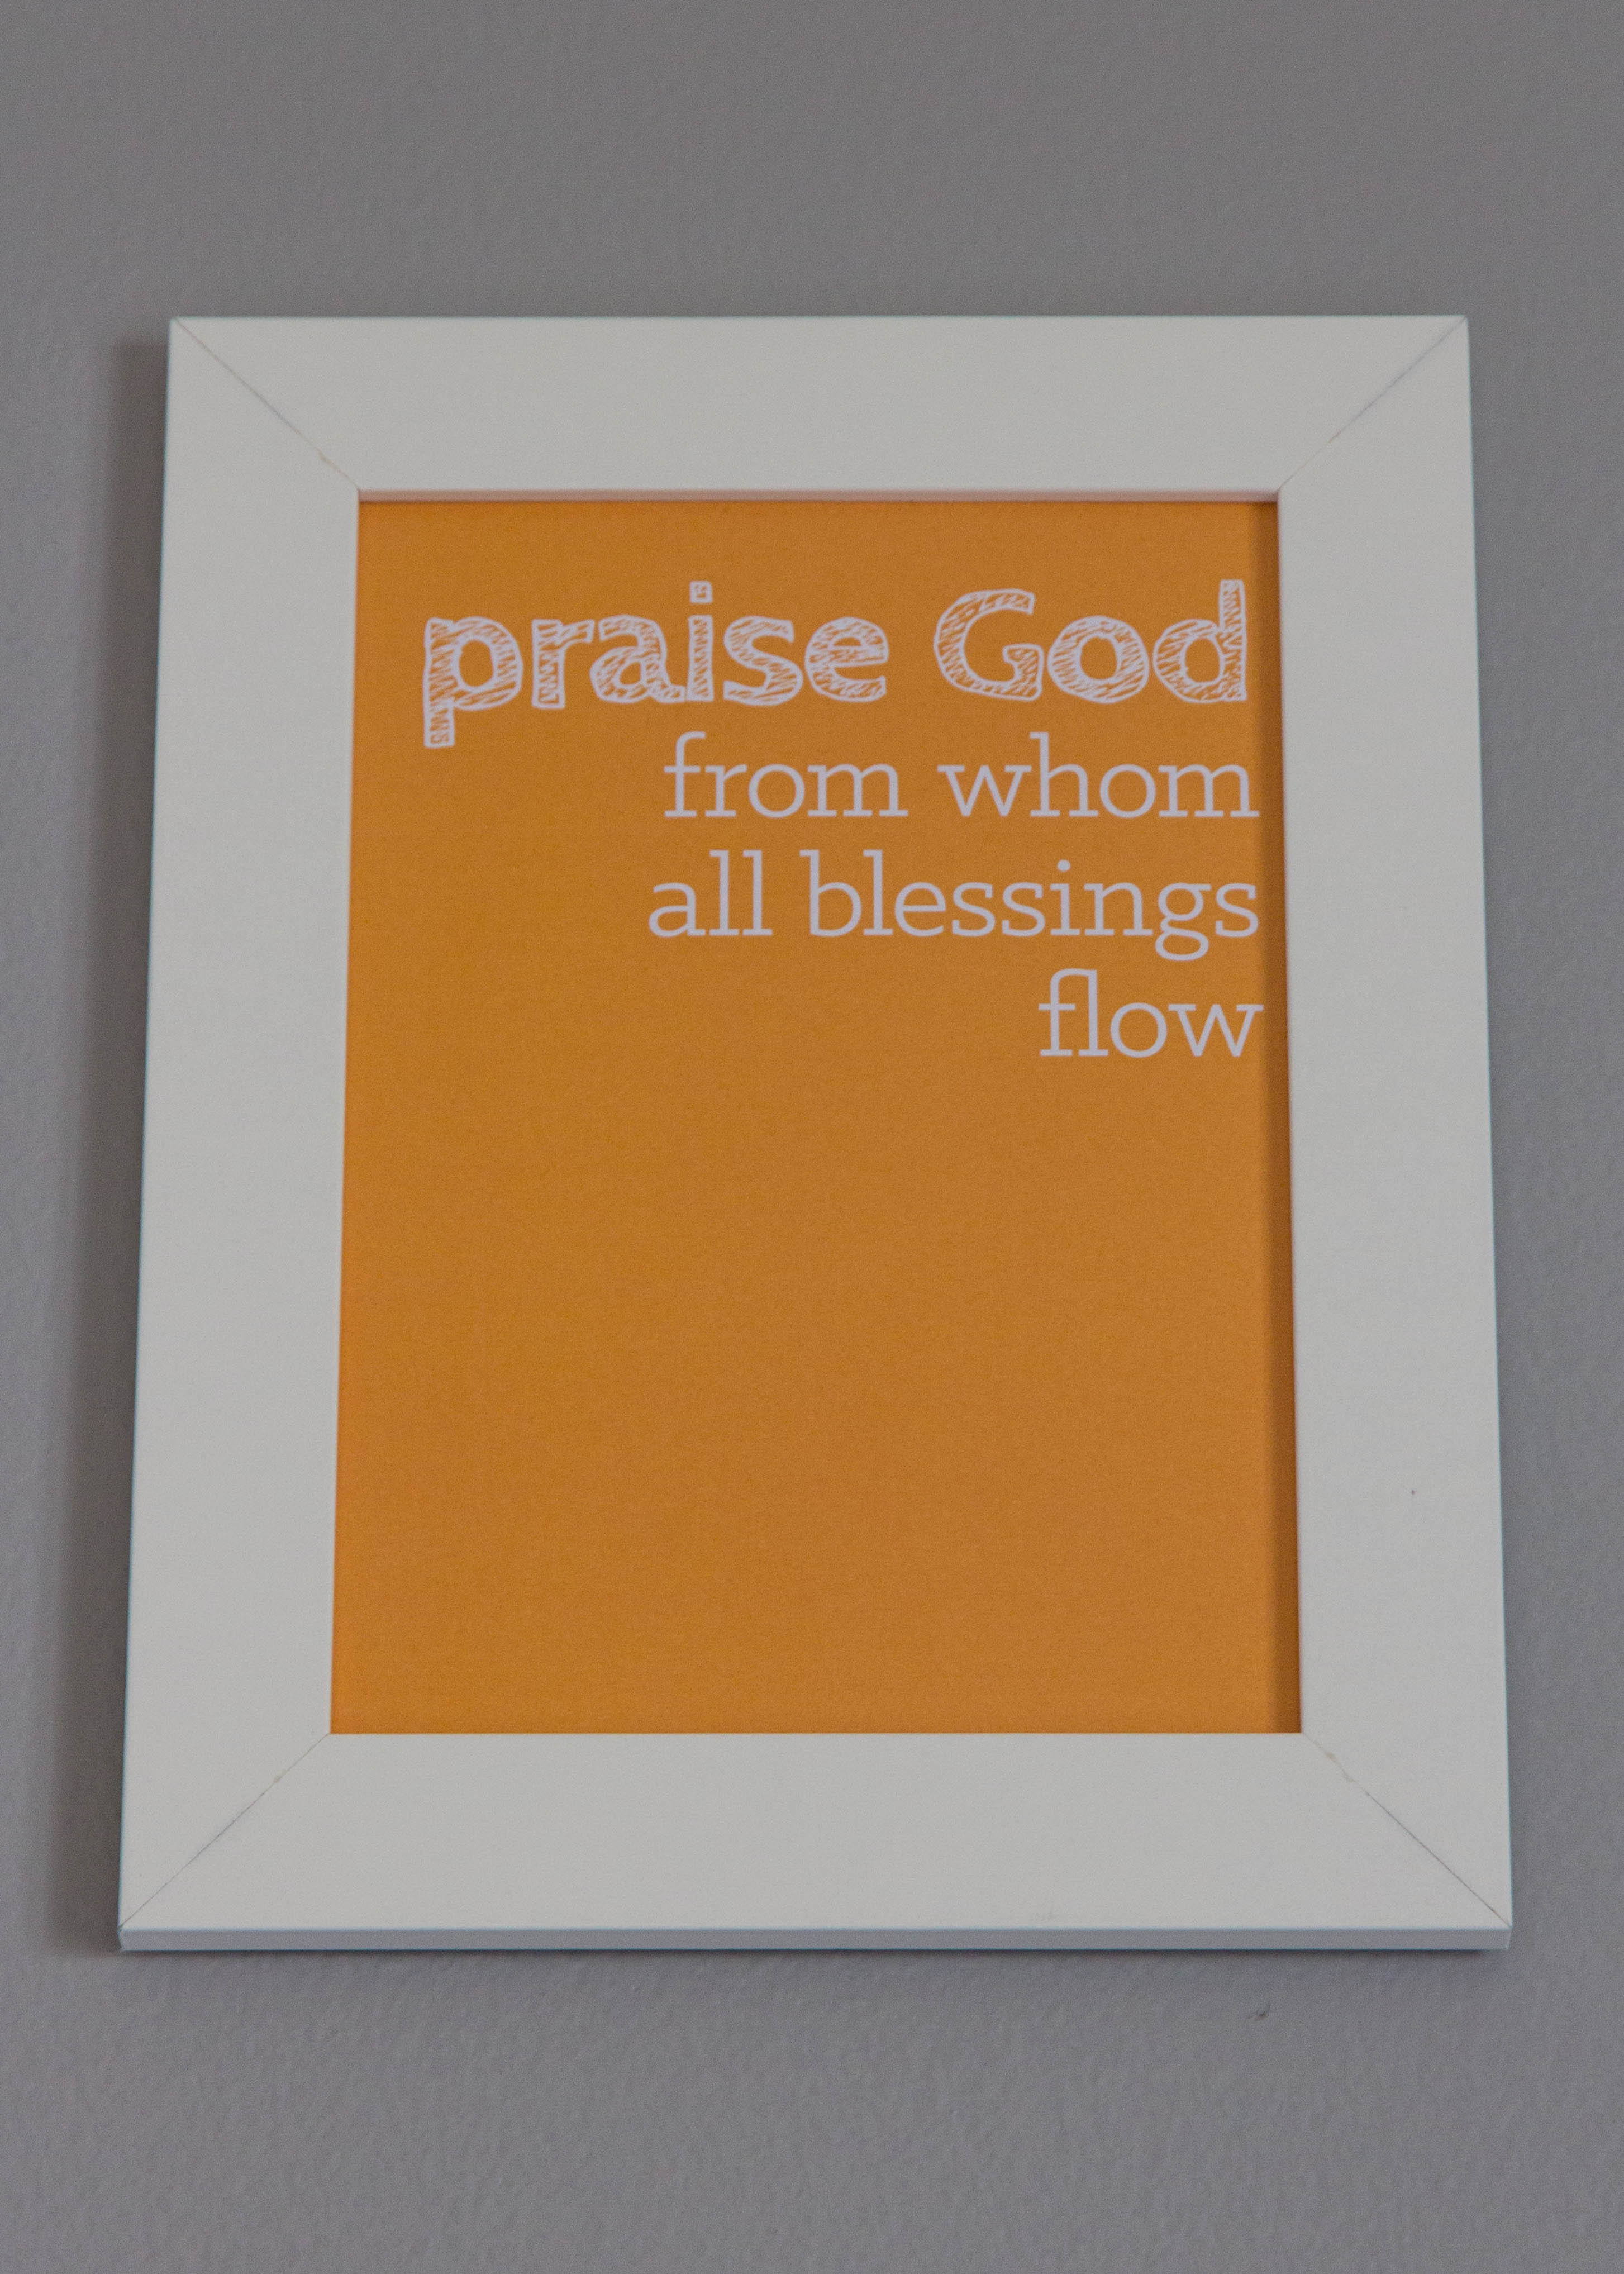 praise God from whom all blessings flow print